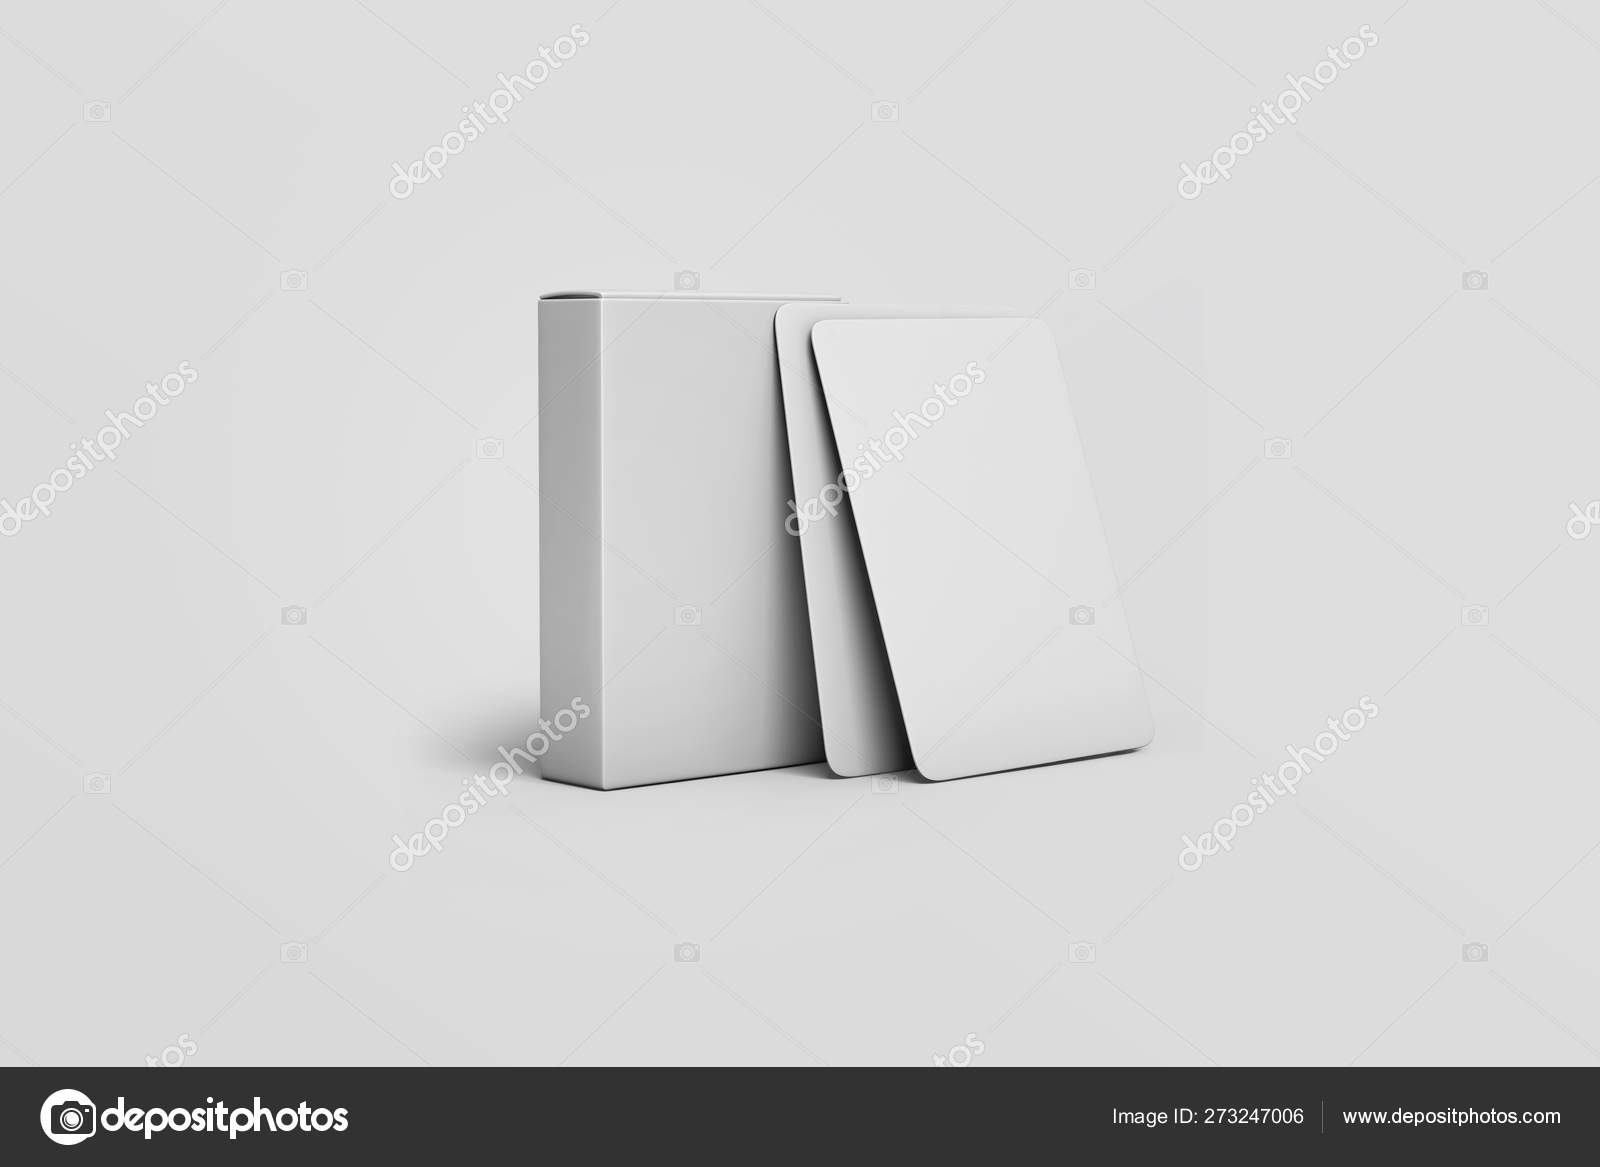 Playing Card Box Blank White Cards Mock Light Grey Background